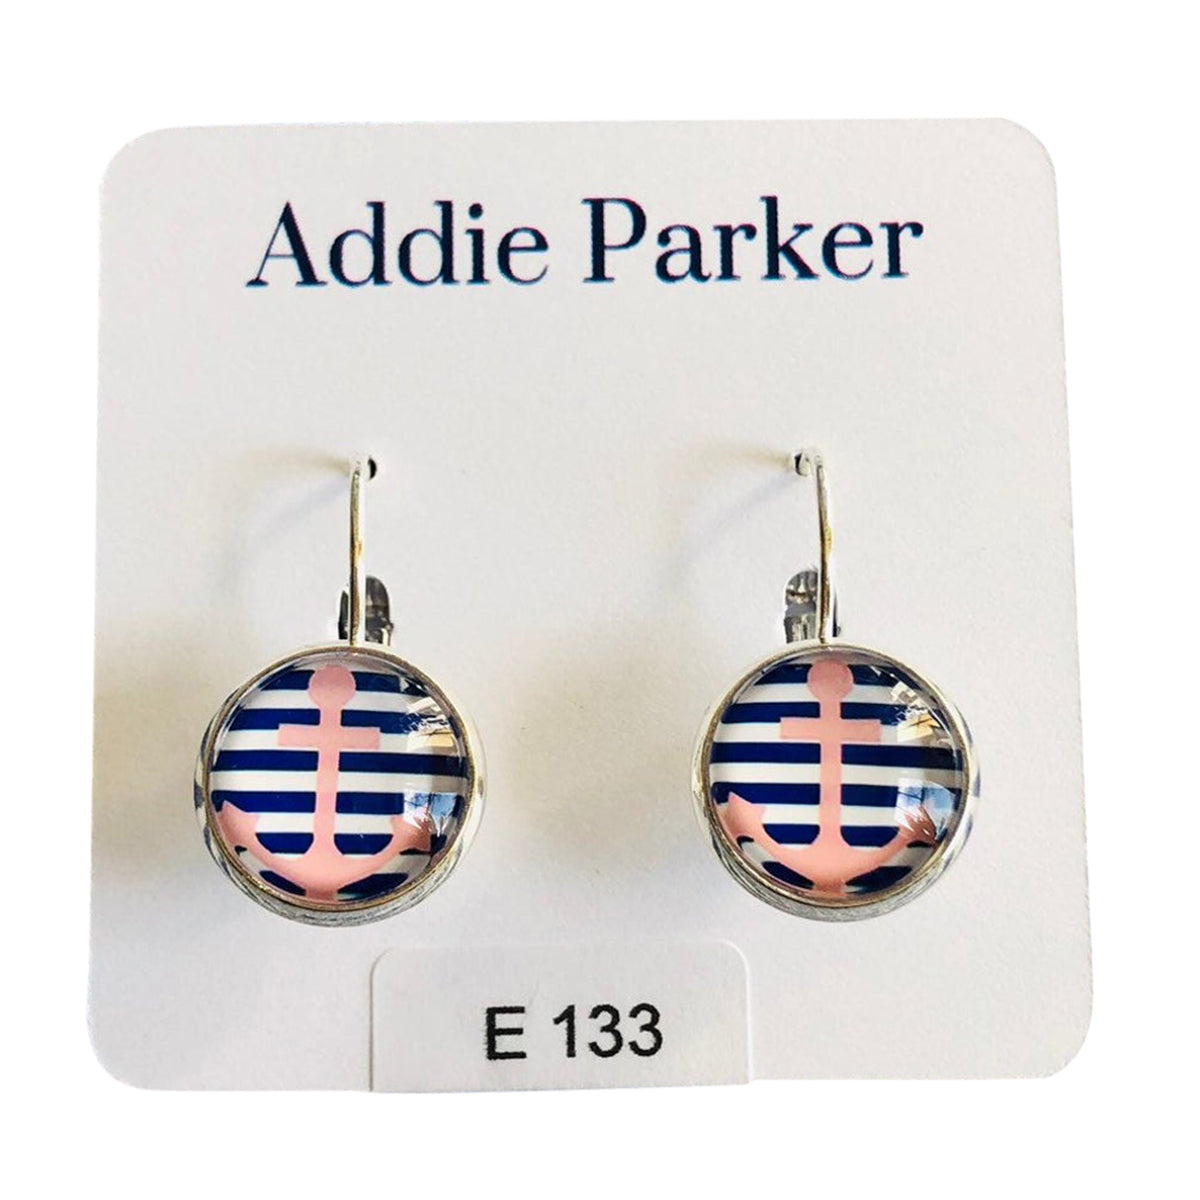 ADDIE PARKER EARRINGS PINK ANCHORS